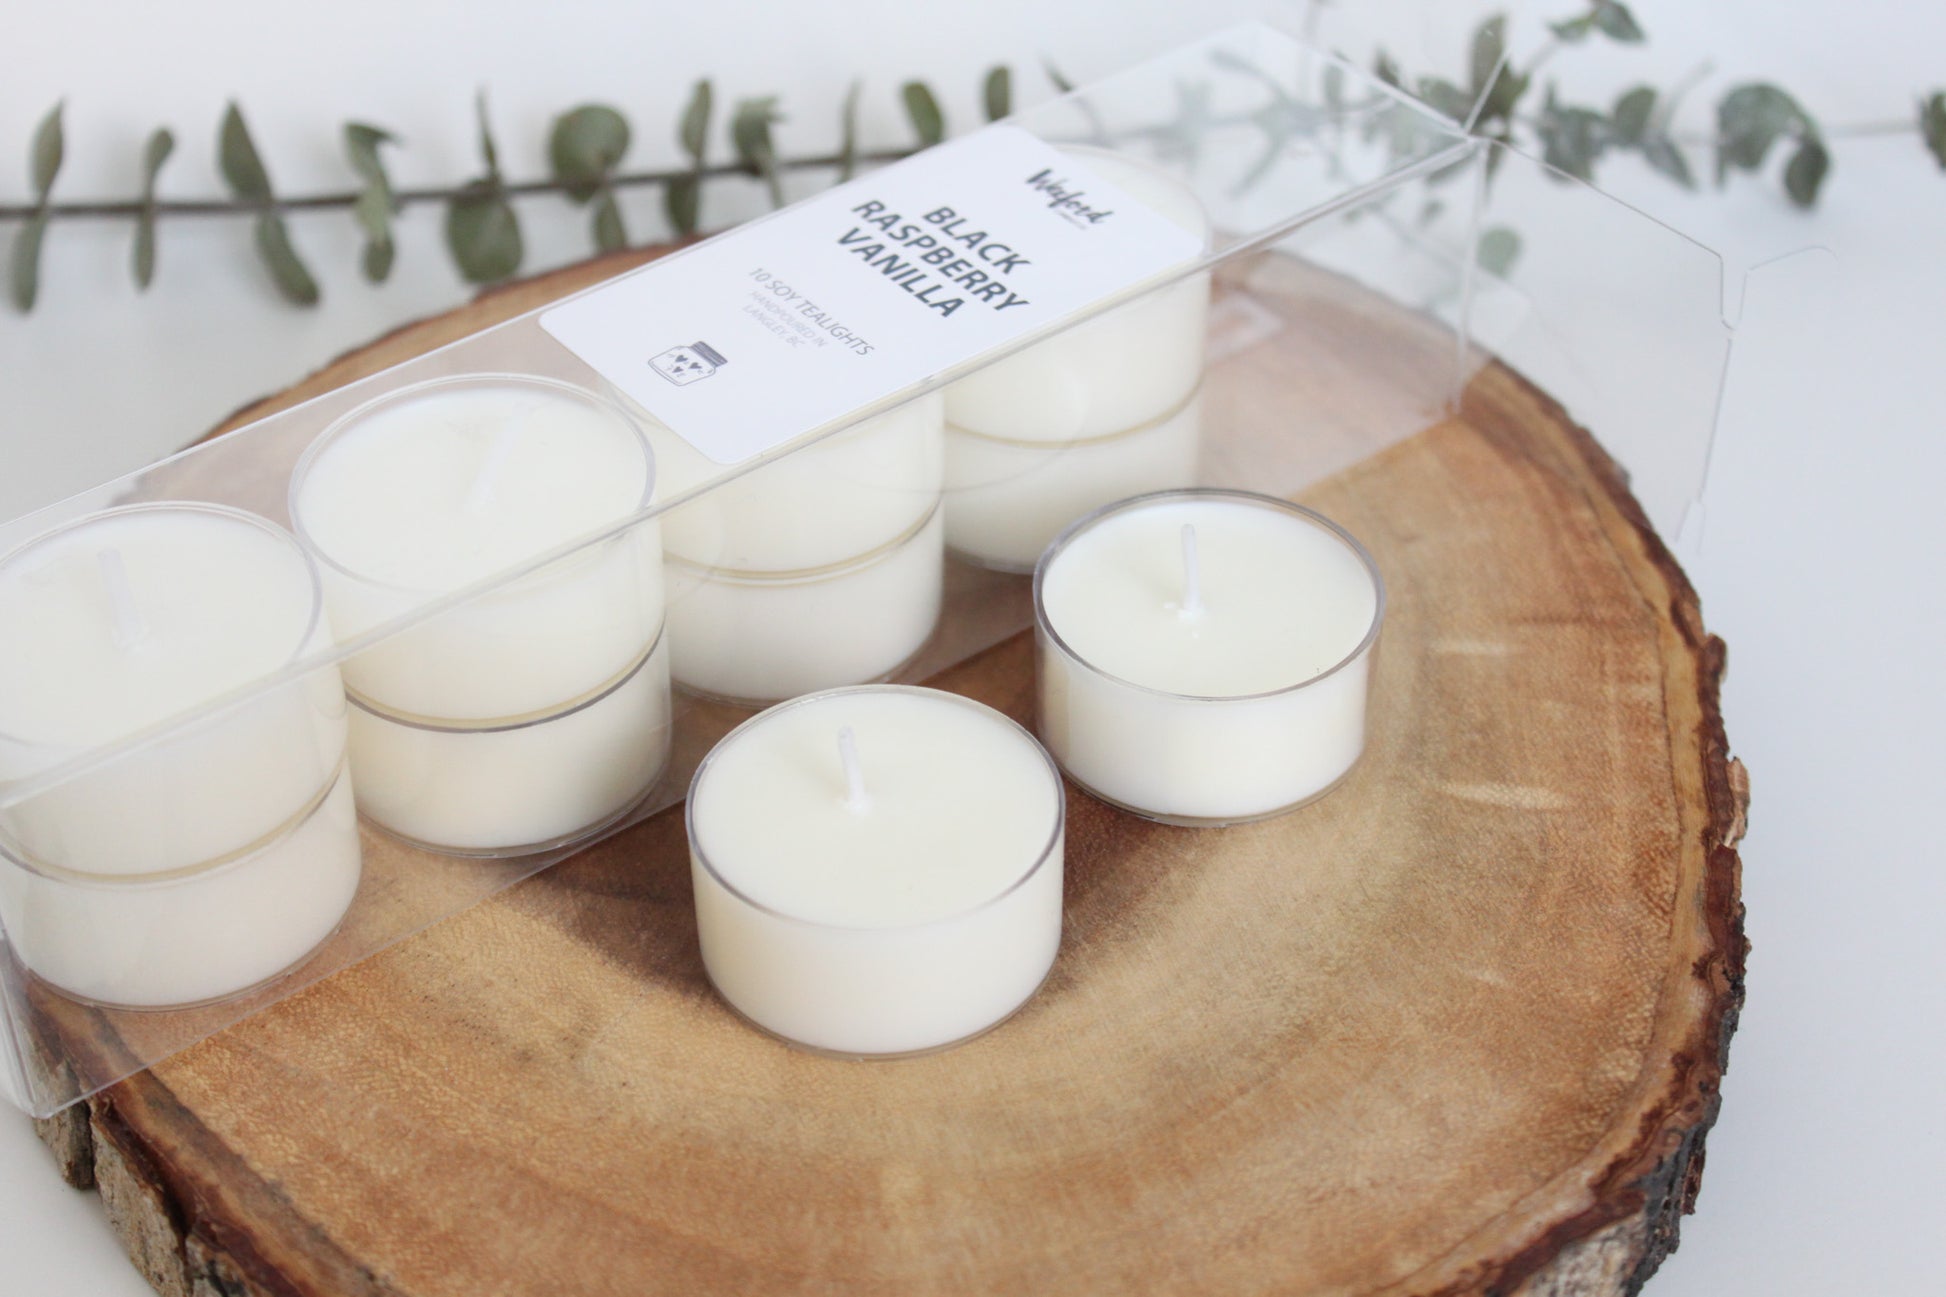 Pack of Soy Tealights - Wexford Candle Co.